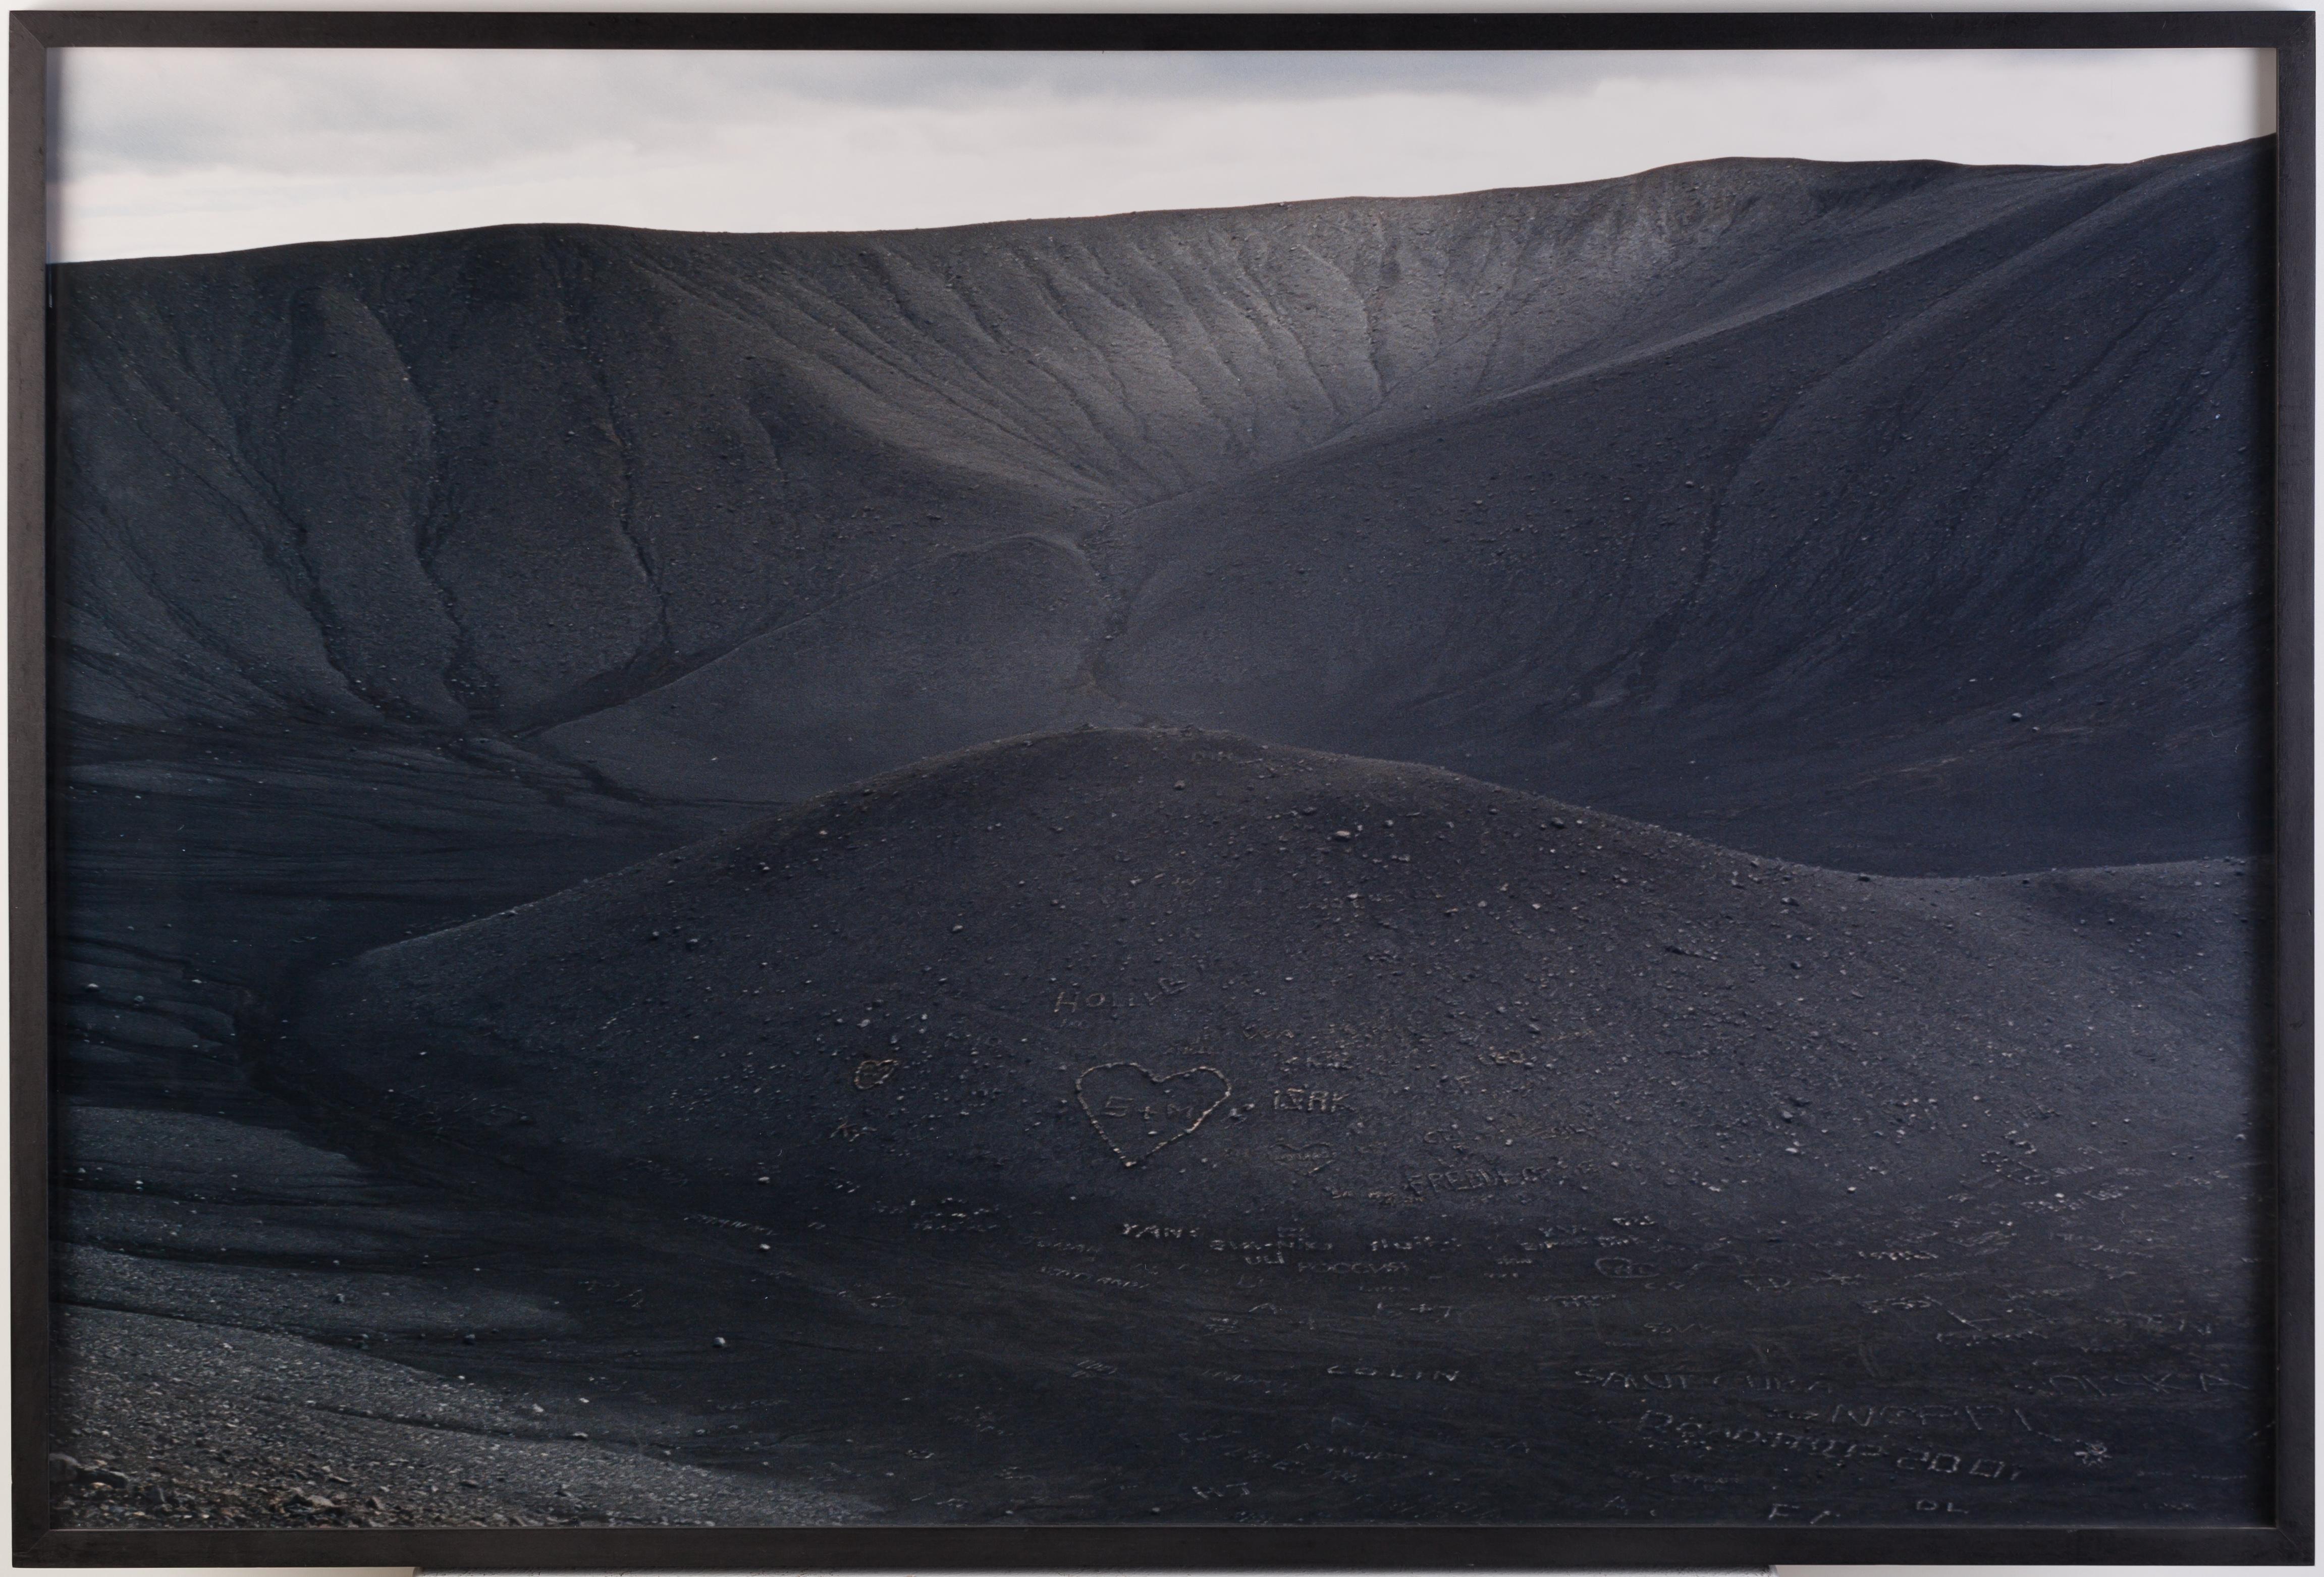 Untitled (Island Series #2) - Contemporary, Landscape, Print, Early 21st Century - Black Landscape Print by Olafur Eliasson